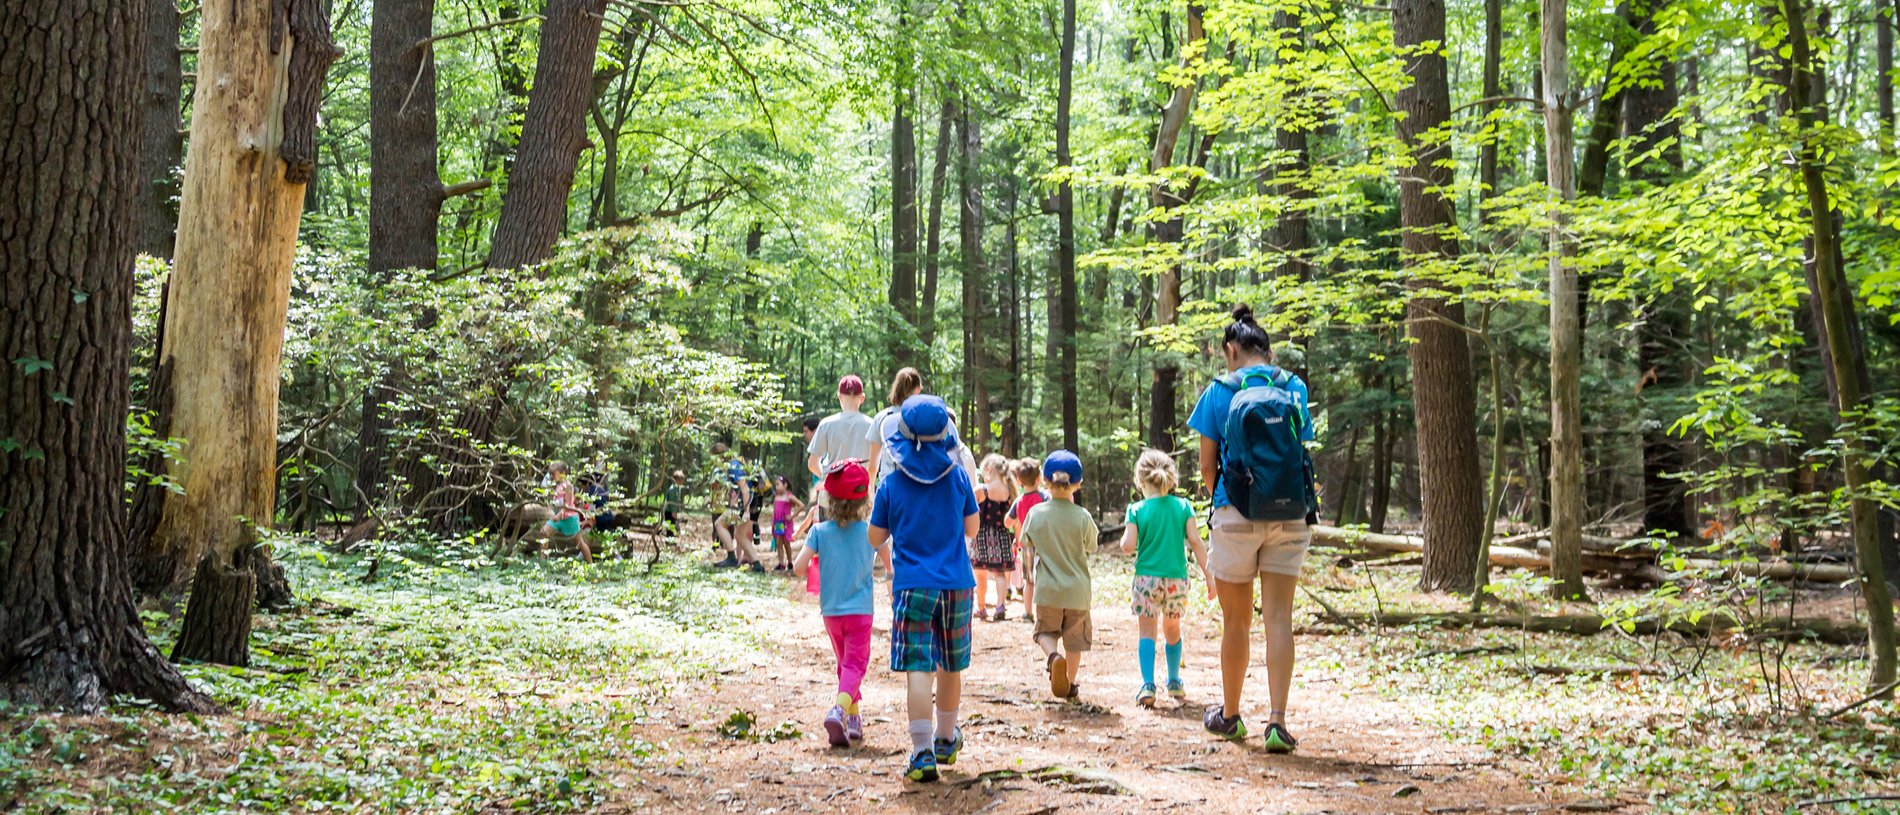 Campers and counselors walking on a trail in the forest